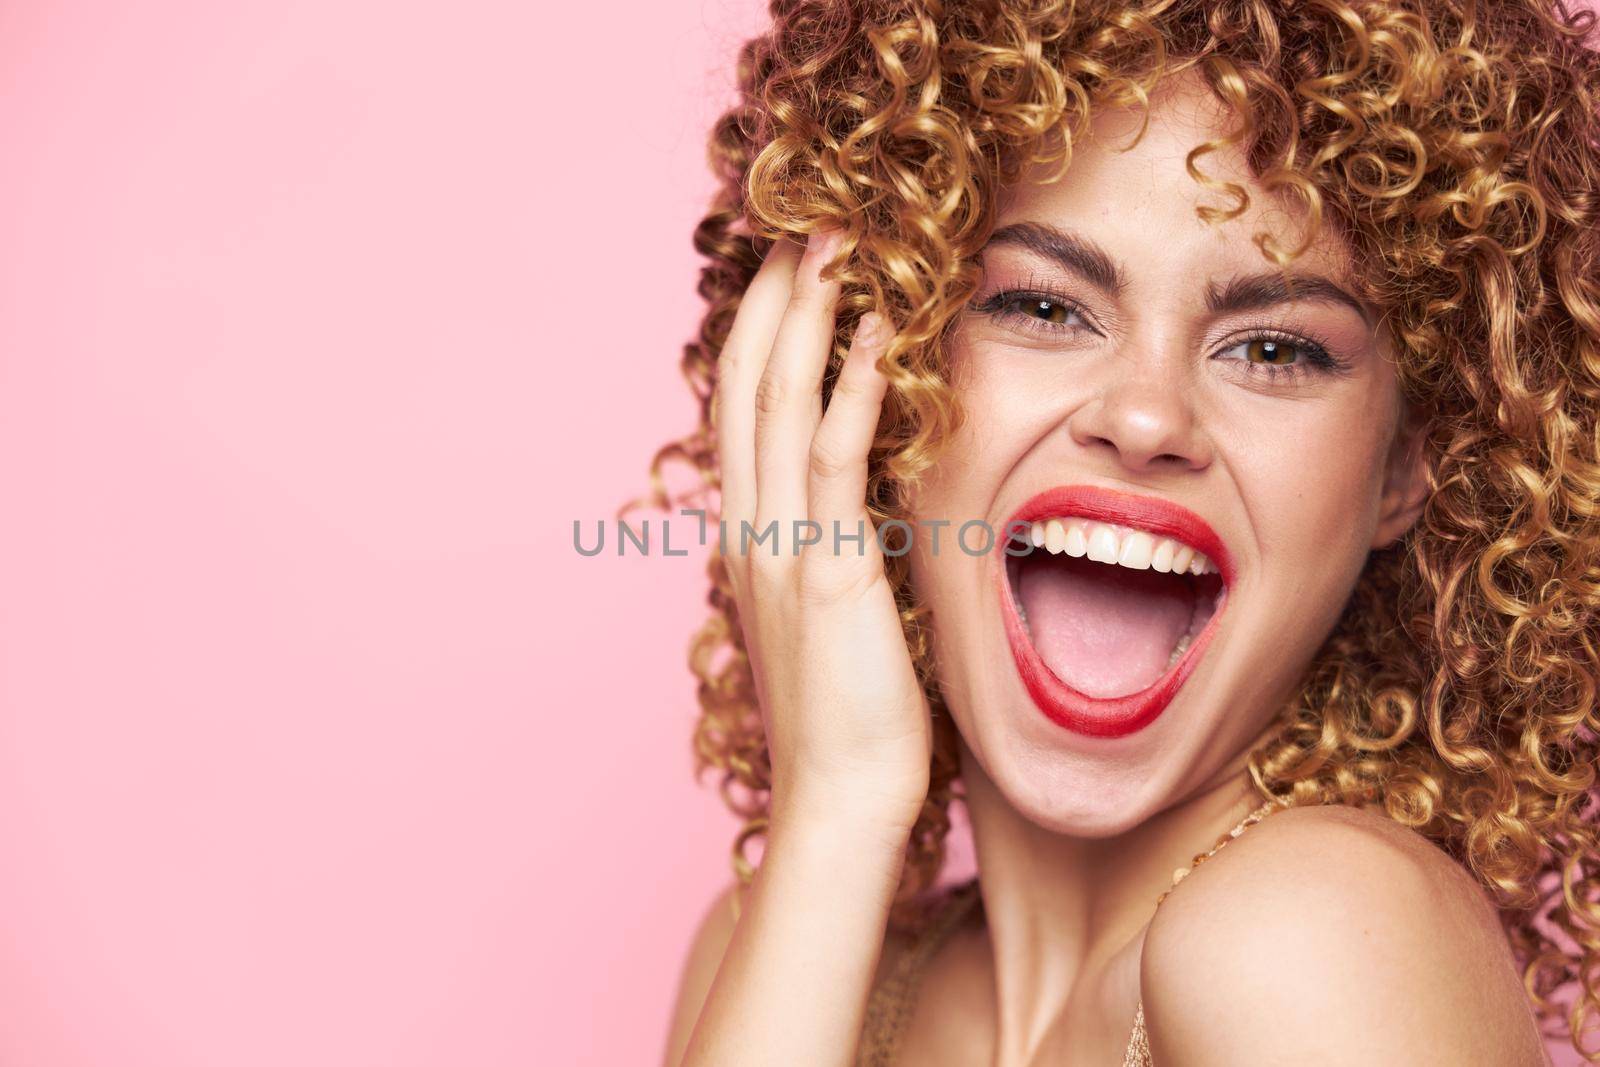 Charming model Energetic appearance wide open mouth emotions curly hair pink background by SHOTPRIME